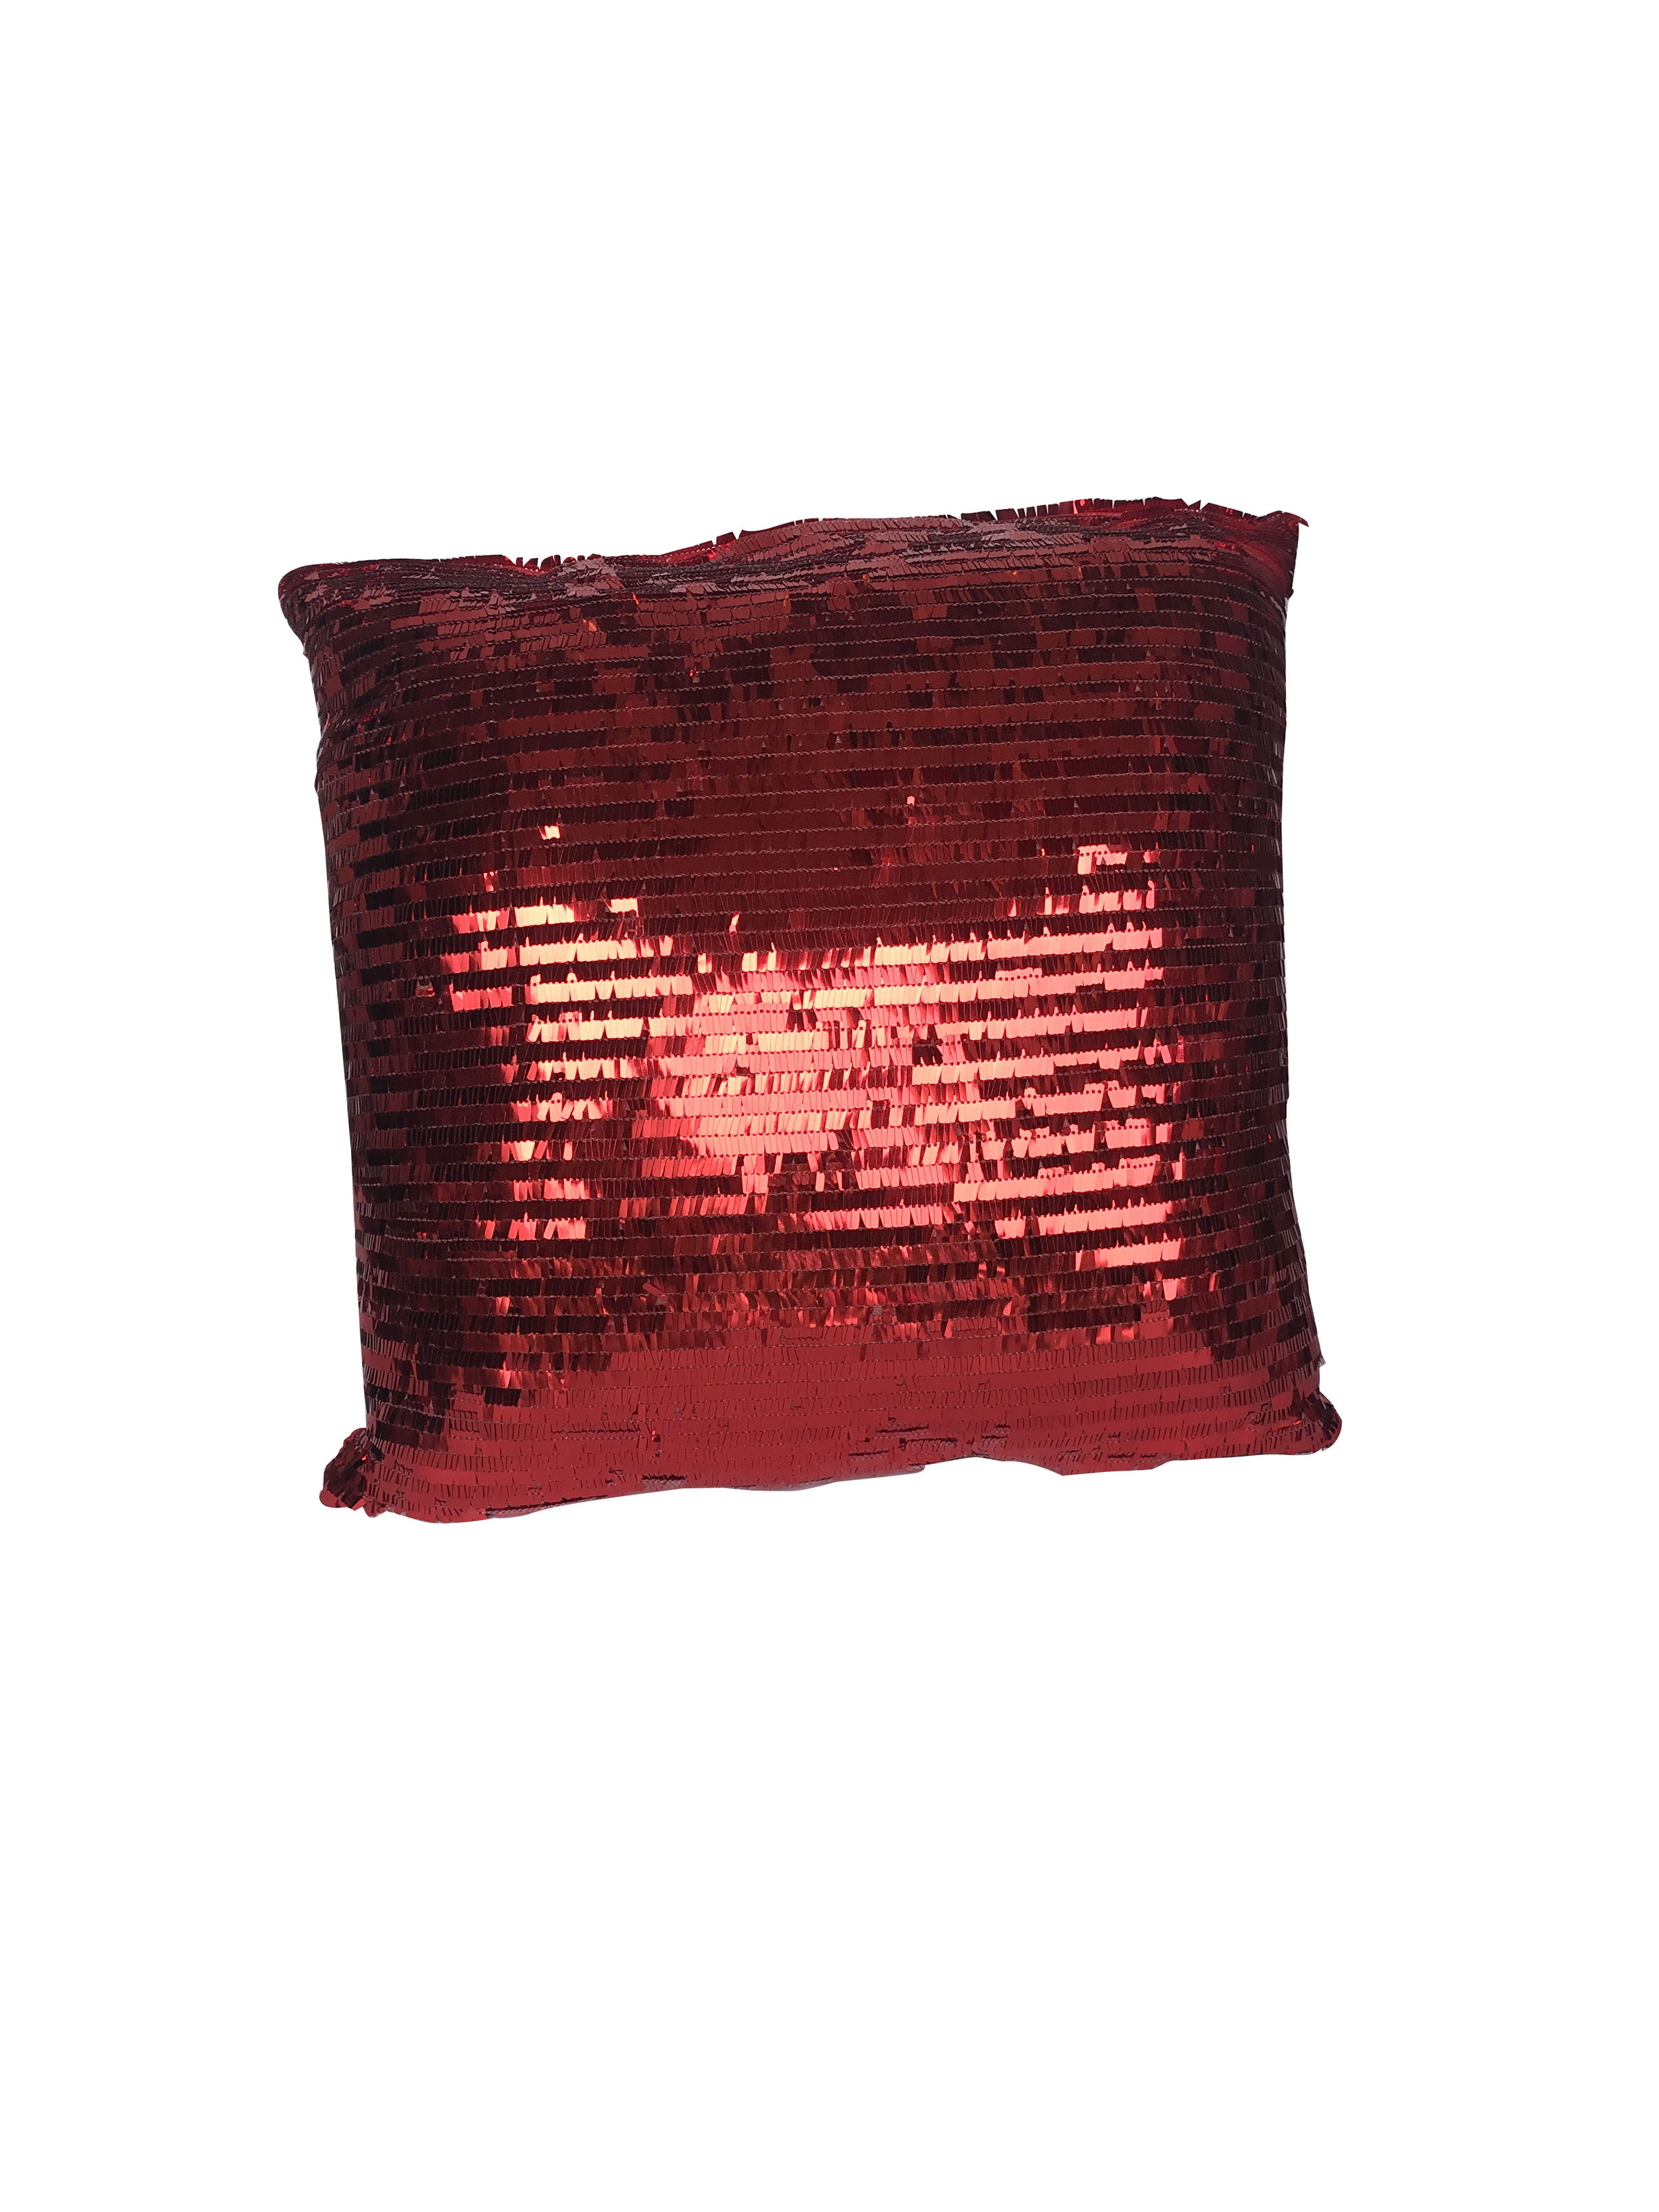 Red Sequined Pillow.JPG